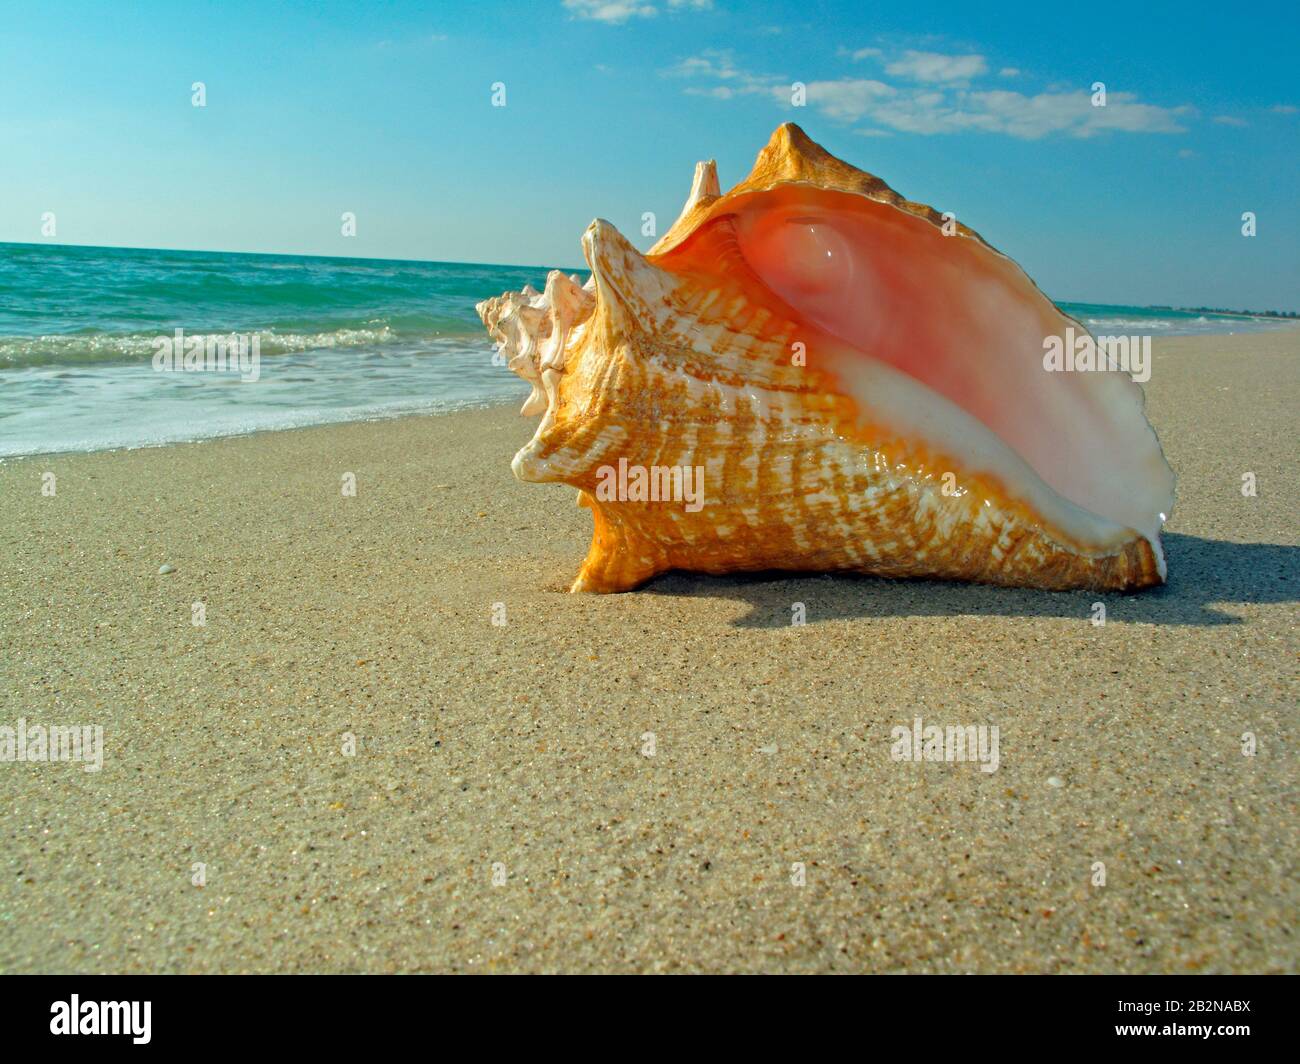 Queen conch shell on beach Stock Photo